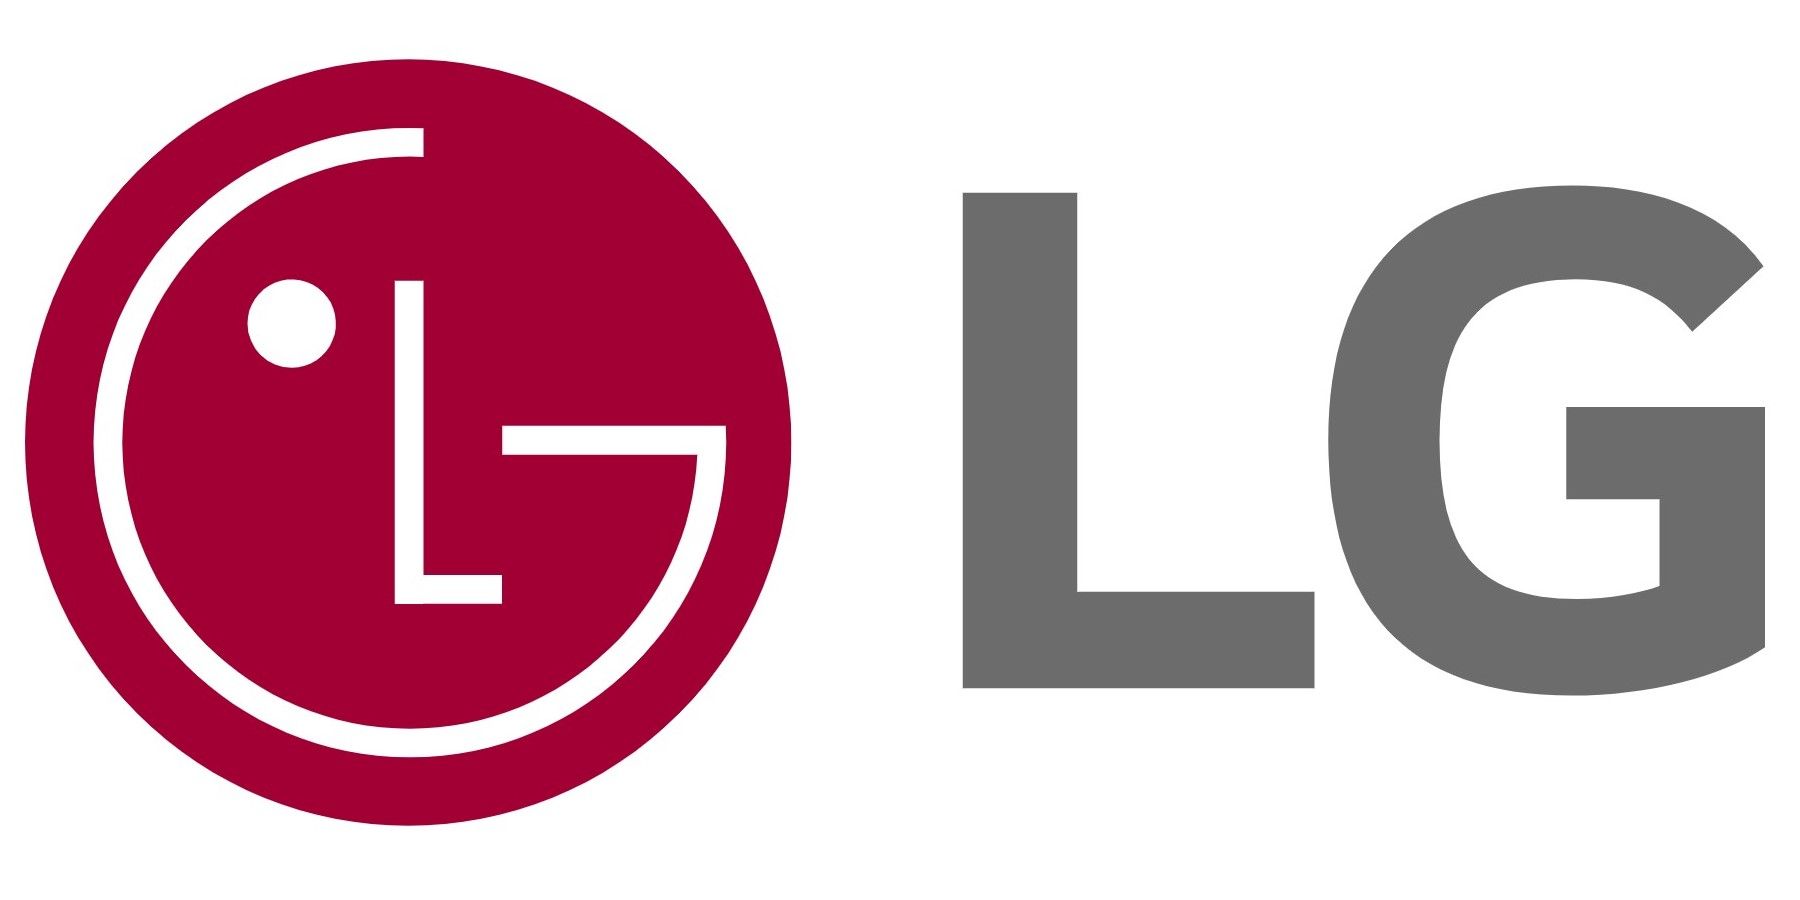 LG announces 1440p, 480 Hz OLED gaming monitor that will be unveiled at CES  2024